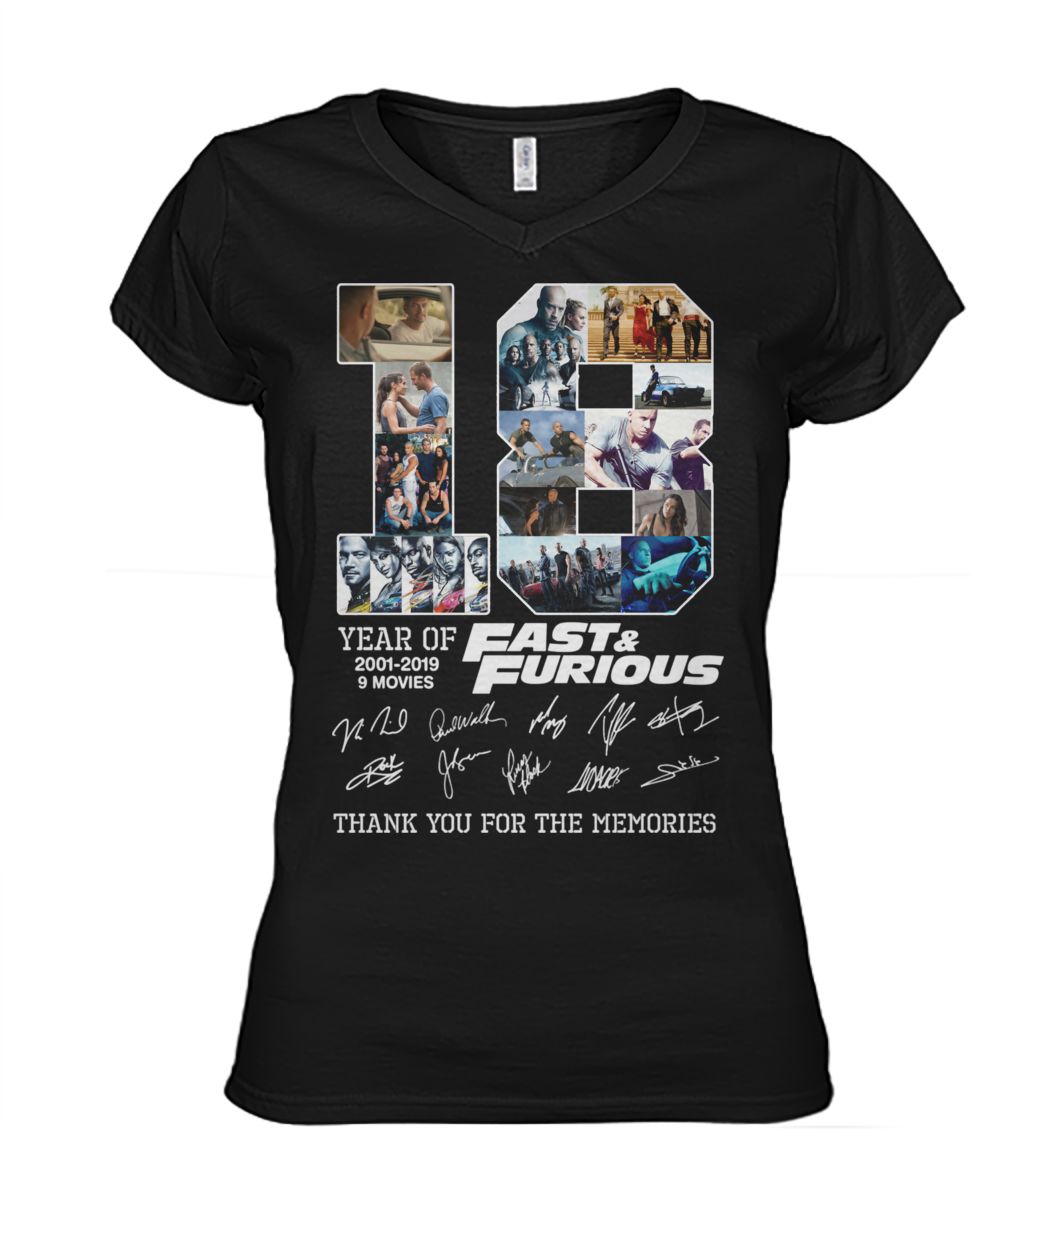 18 years of fast and furious 2001 2019 9 films signatures women's v-neck